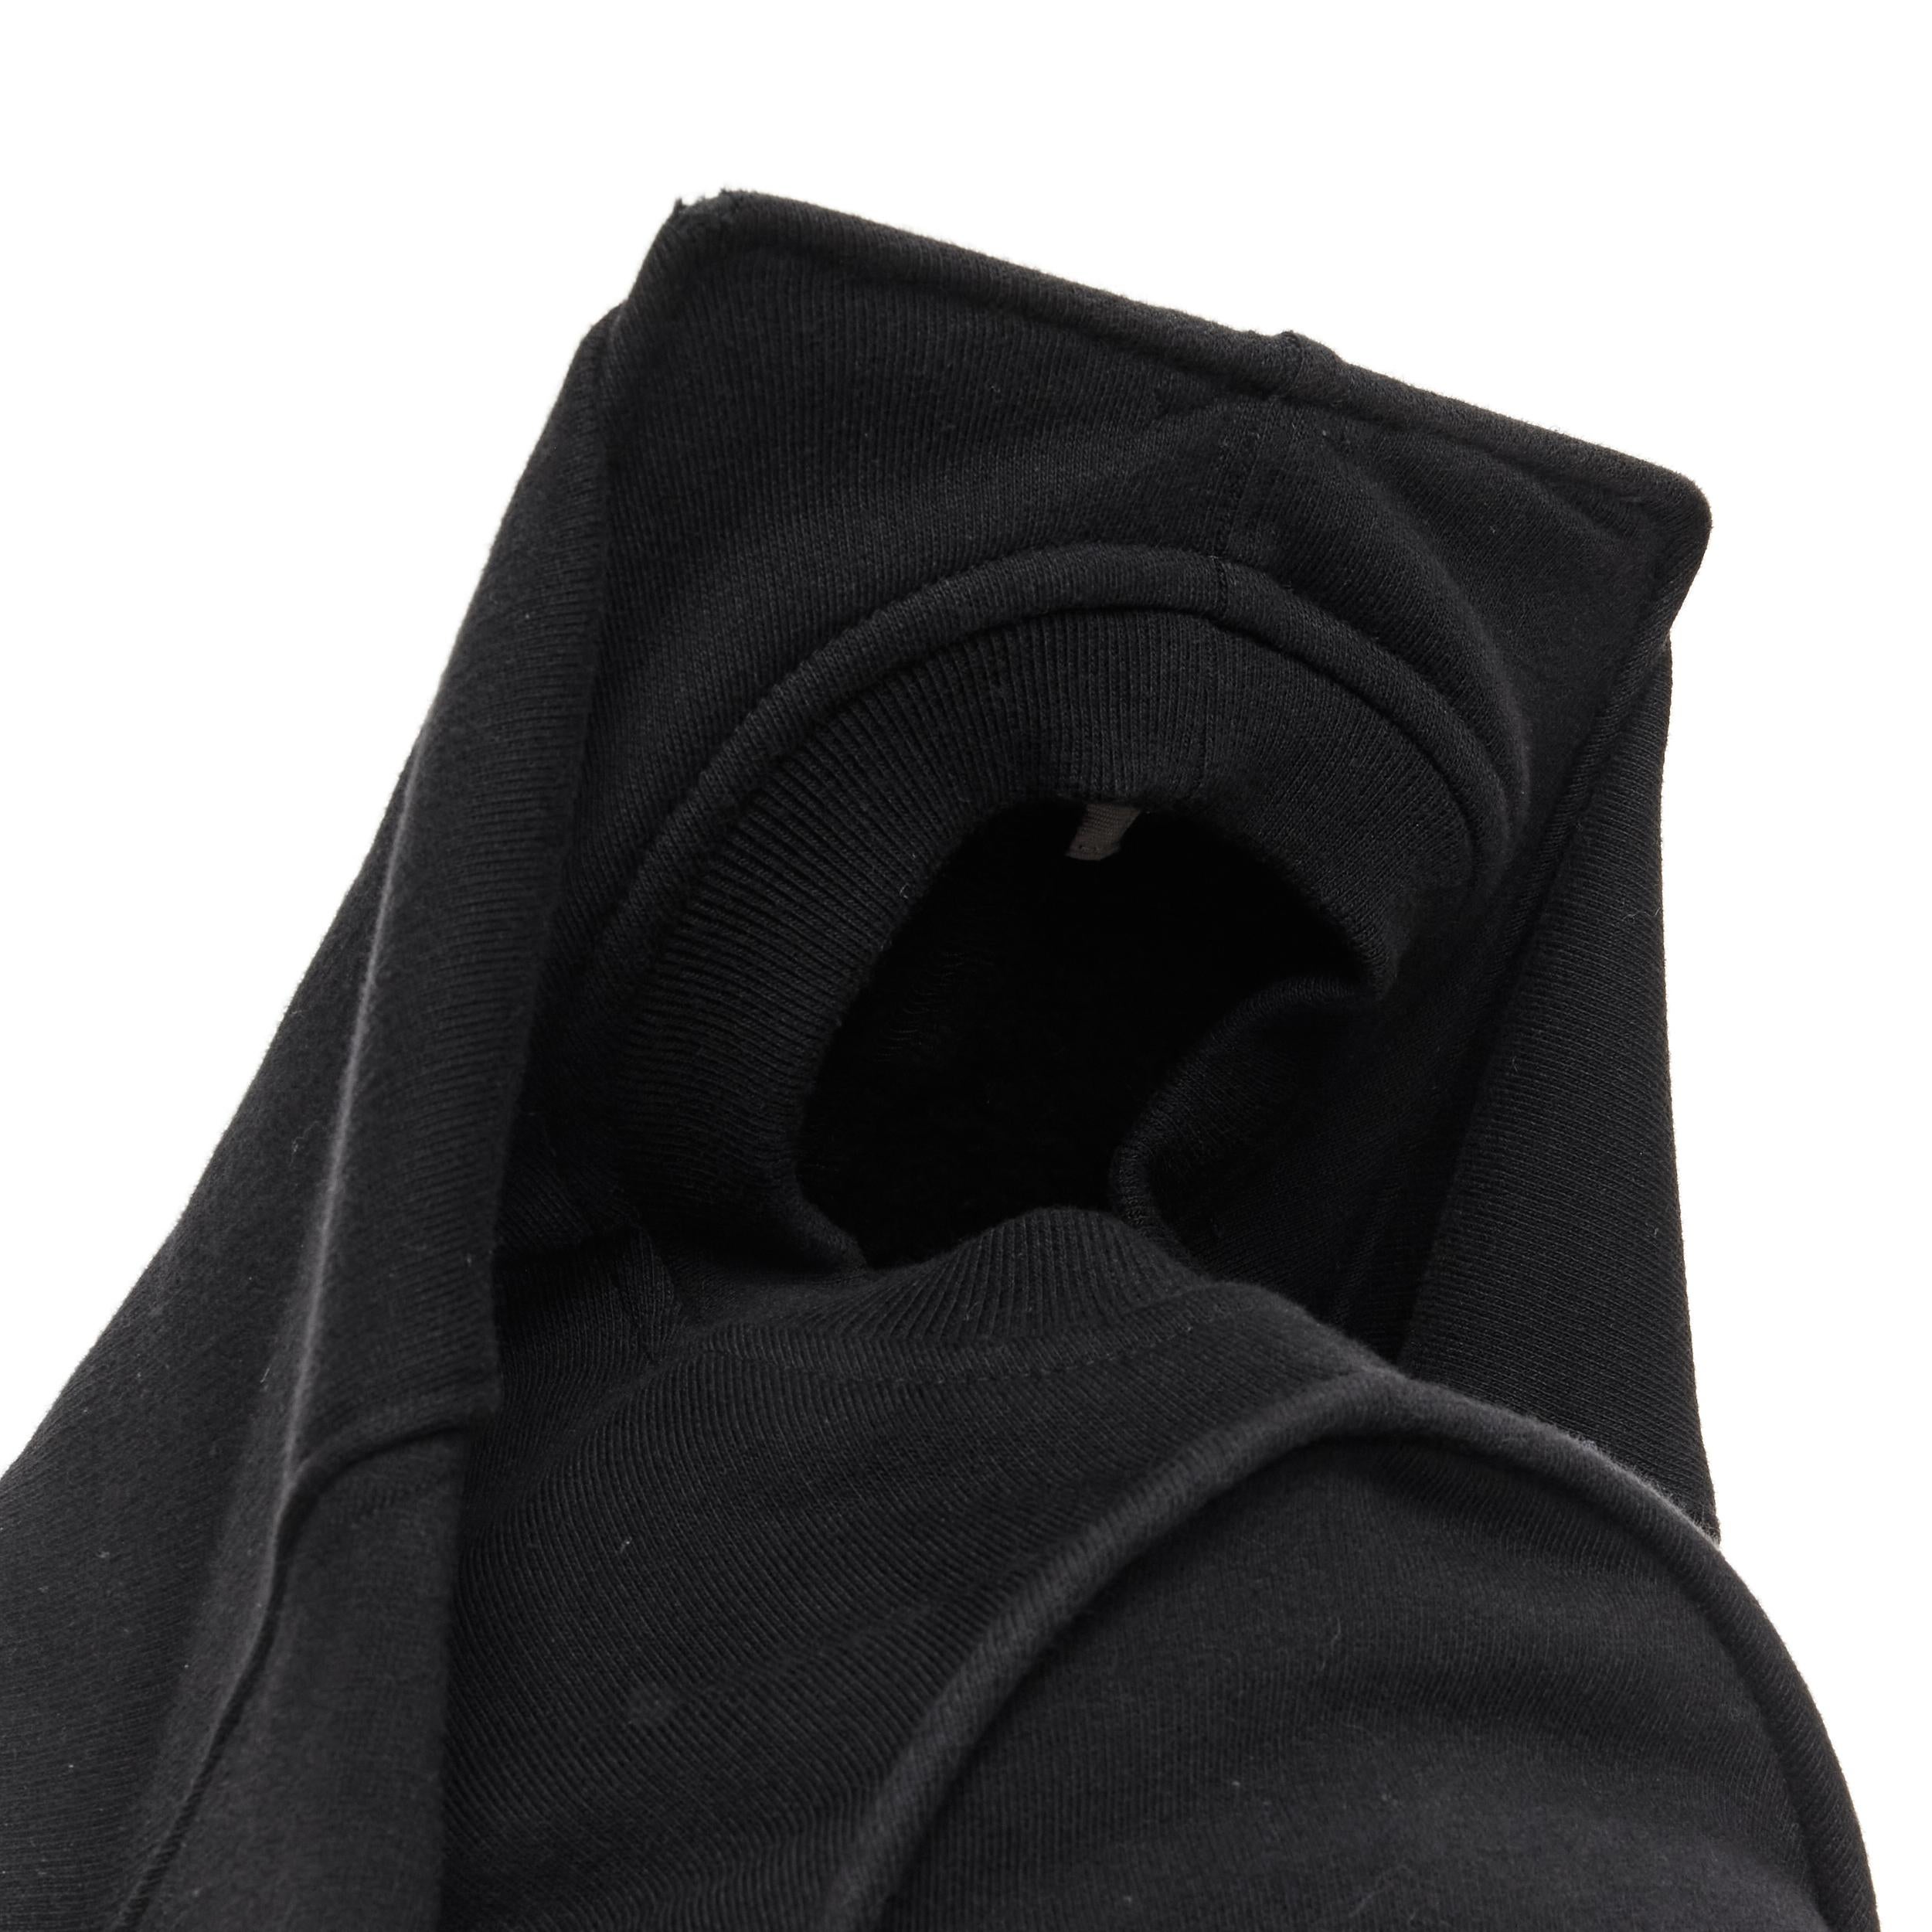 rare RICK OWENS Anubis Runway 2017 structured frame cotton hoodie hat 
Reference: CRTI/A00383 
Brand: Rick Owens 
Designer: Rick Owens 
Material: Cotton 
Color: Black 
Pattern: Solid 
Extra Detail: Structured wire frame Fleece lined mini hoodie